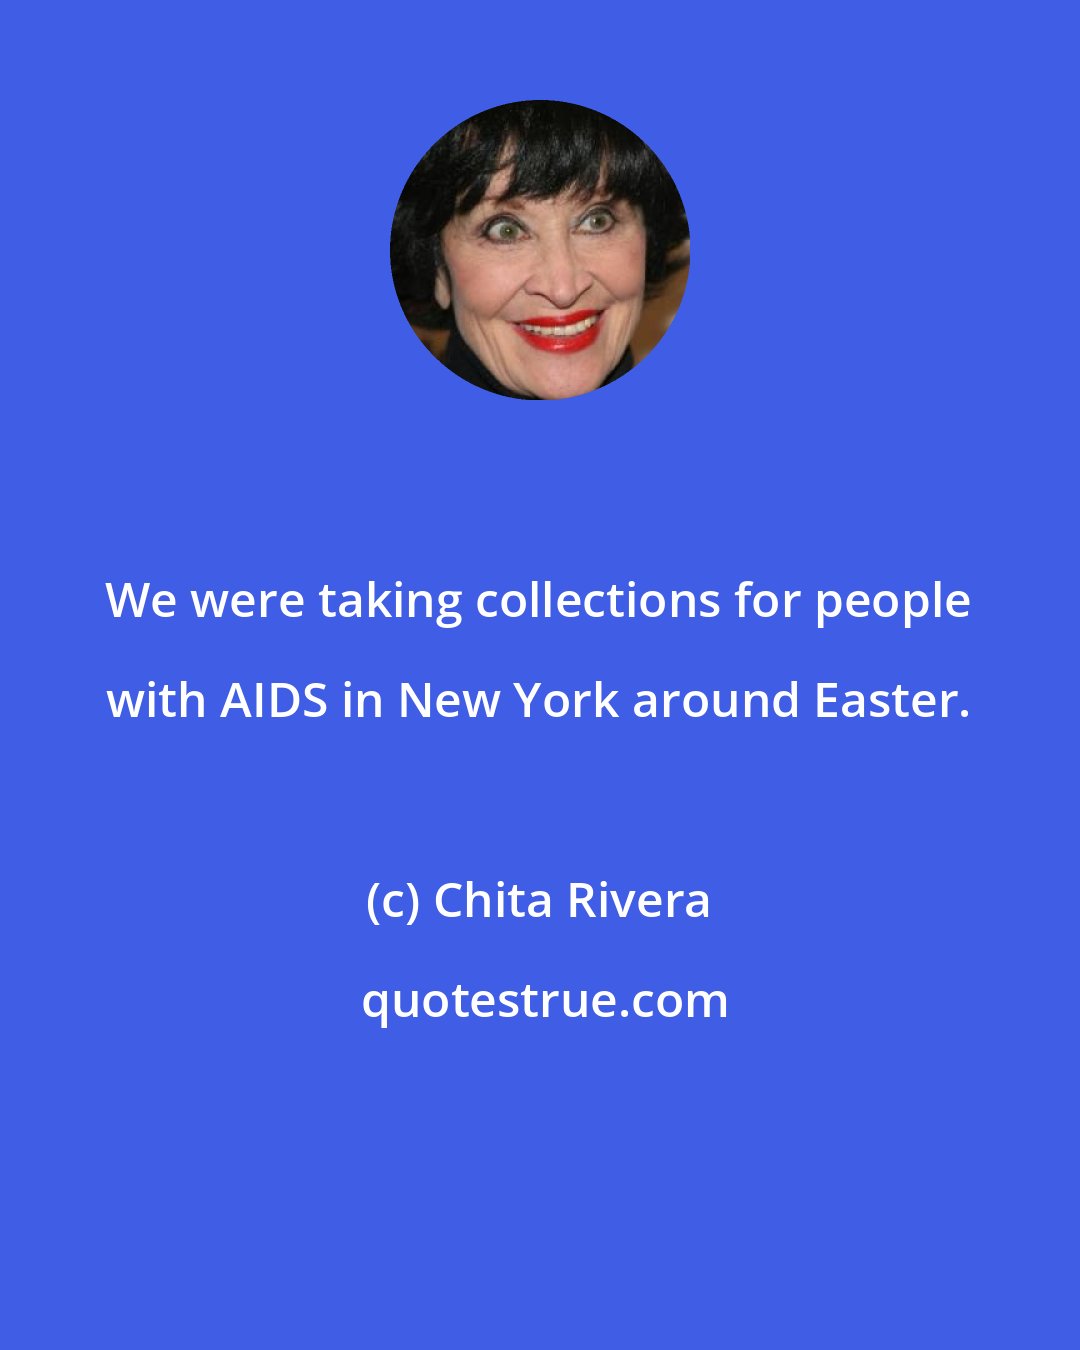 Chita Rivera: We were taking collections for people with AIDS in New York around Easter.